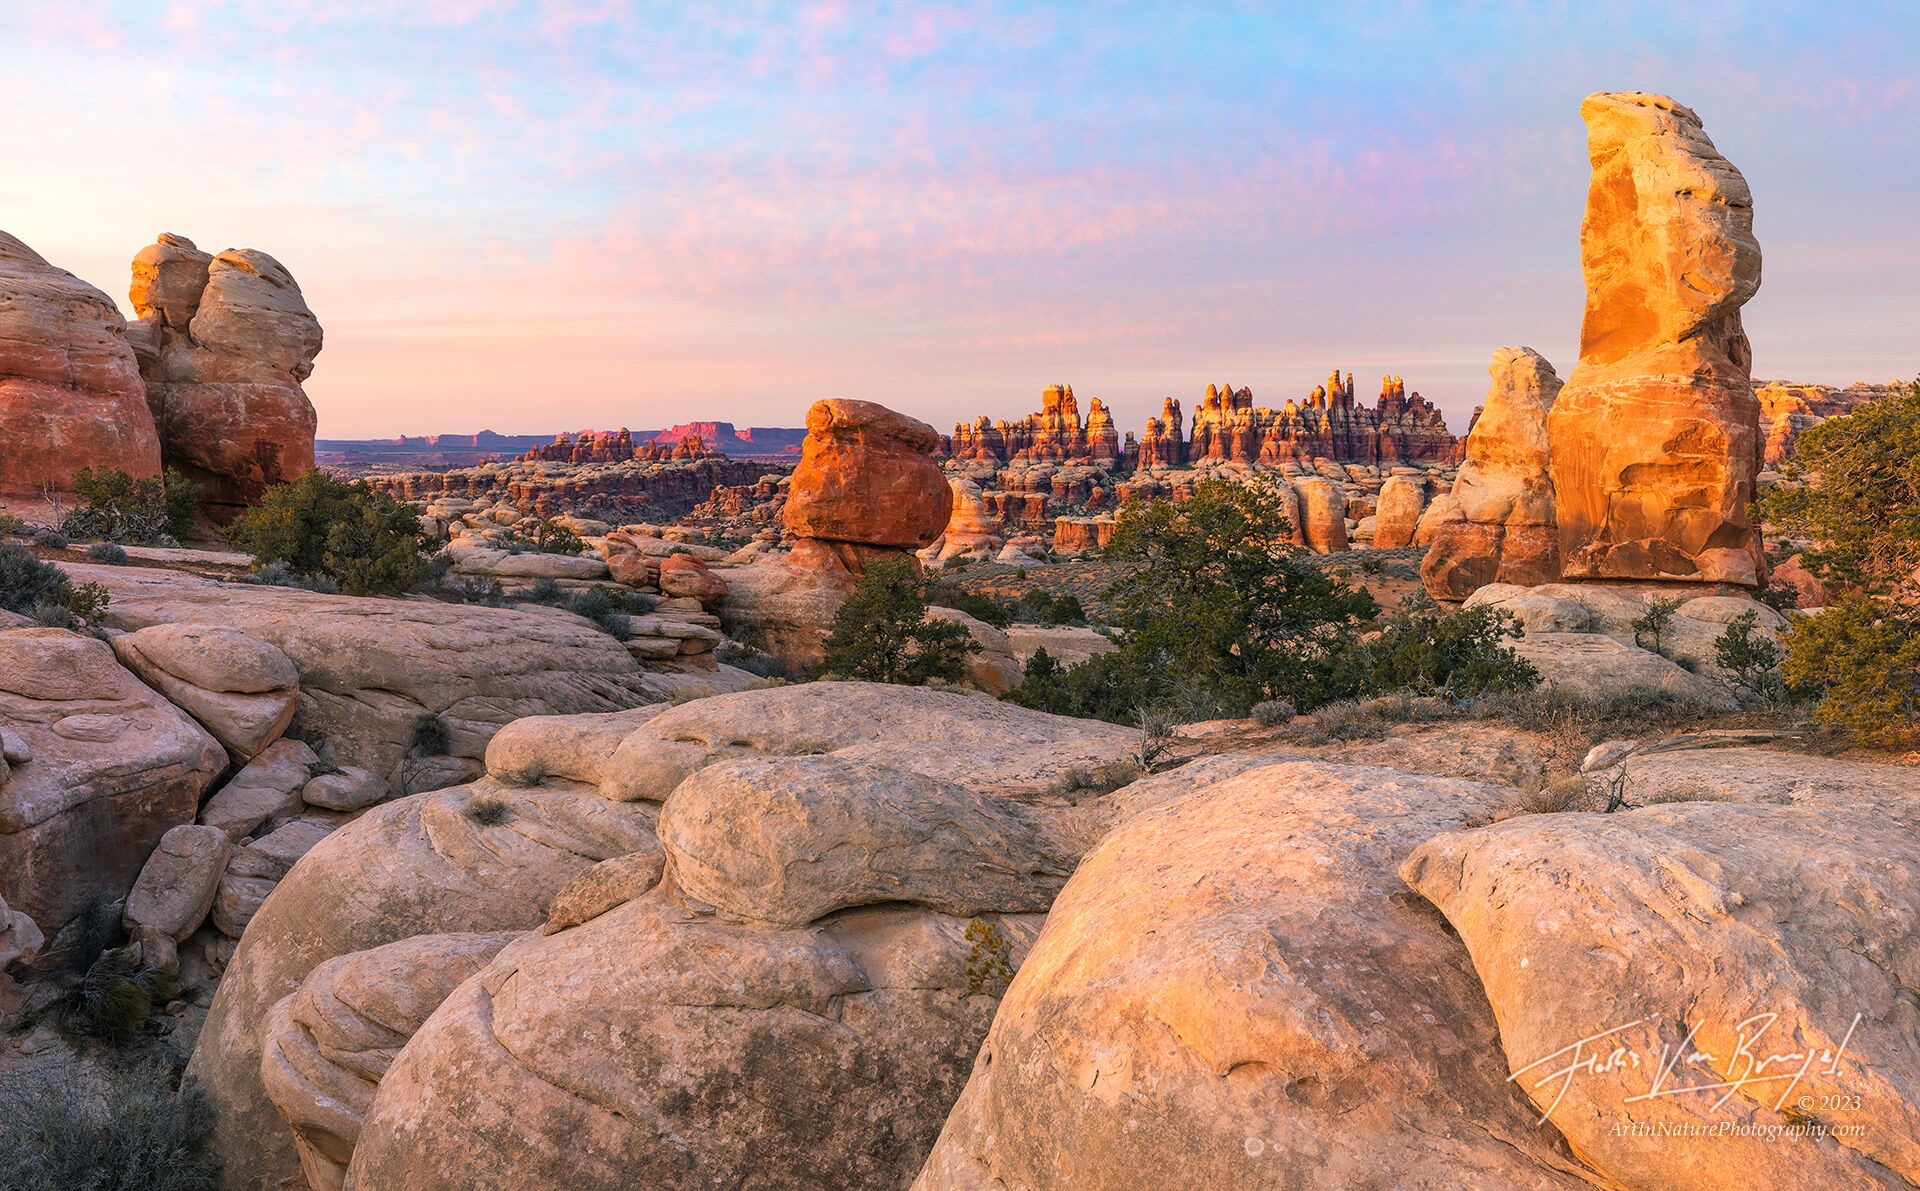 A delicate sunset over a spectacular view of the the Needles District in Utah's Canyonlands National Park. Although this view...